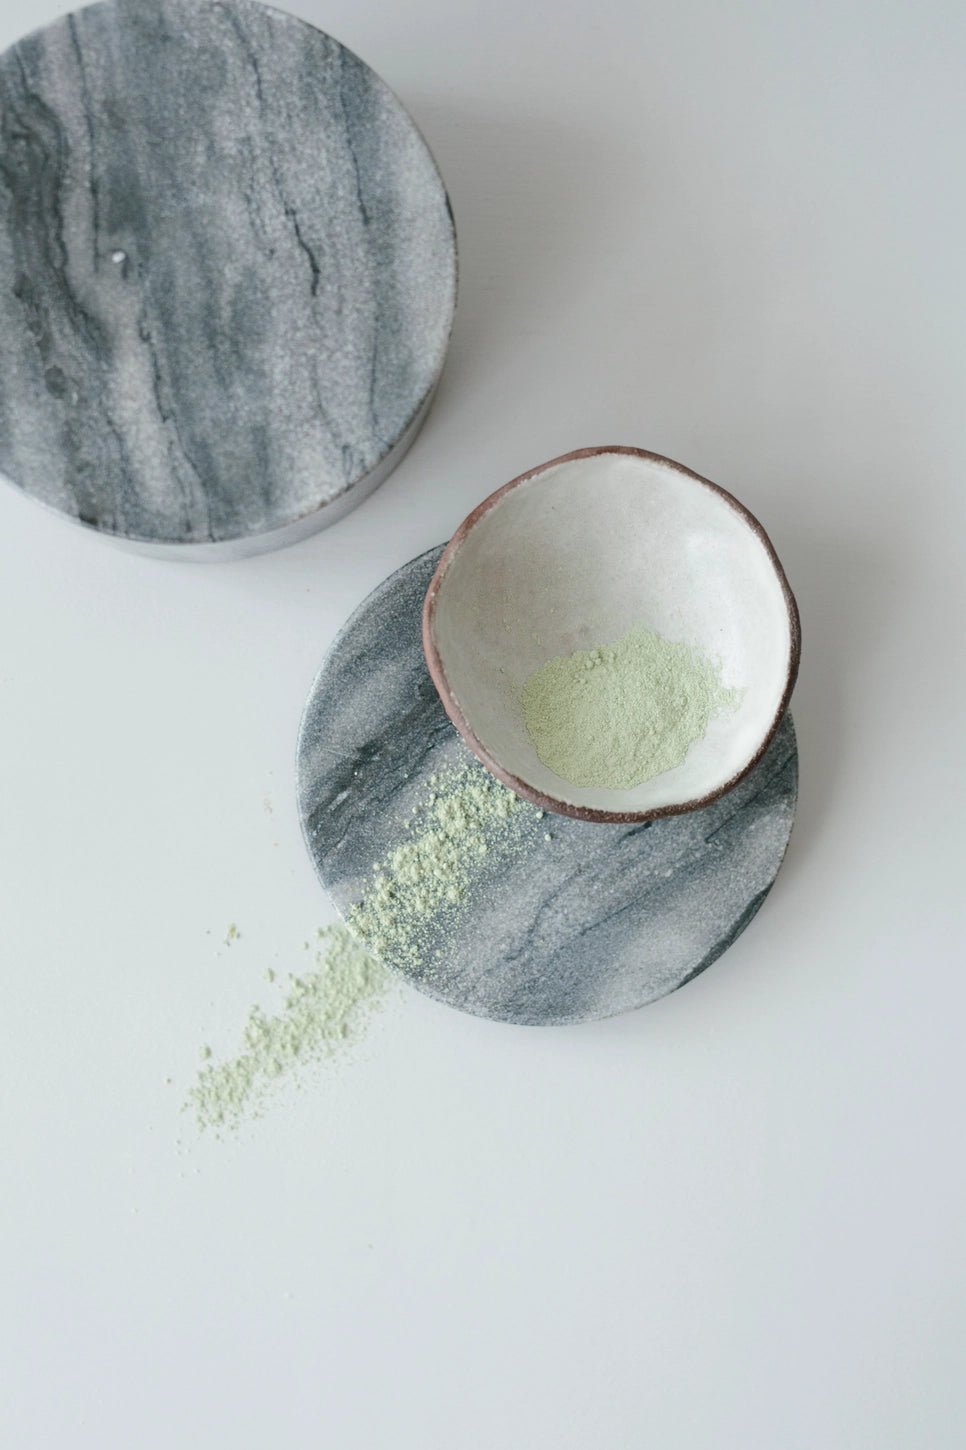 Green Theory Clay Face Mask